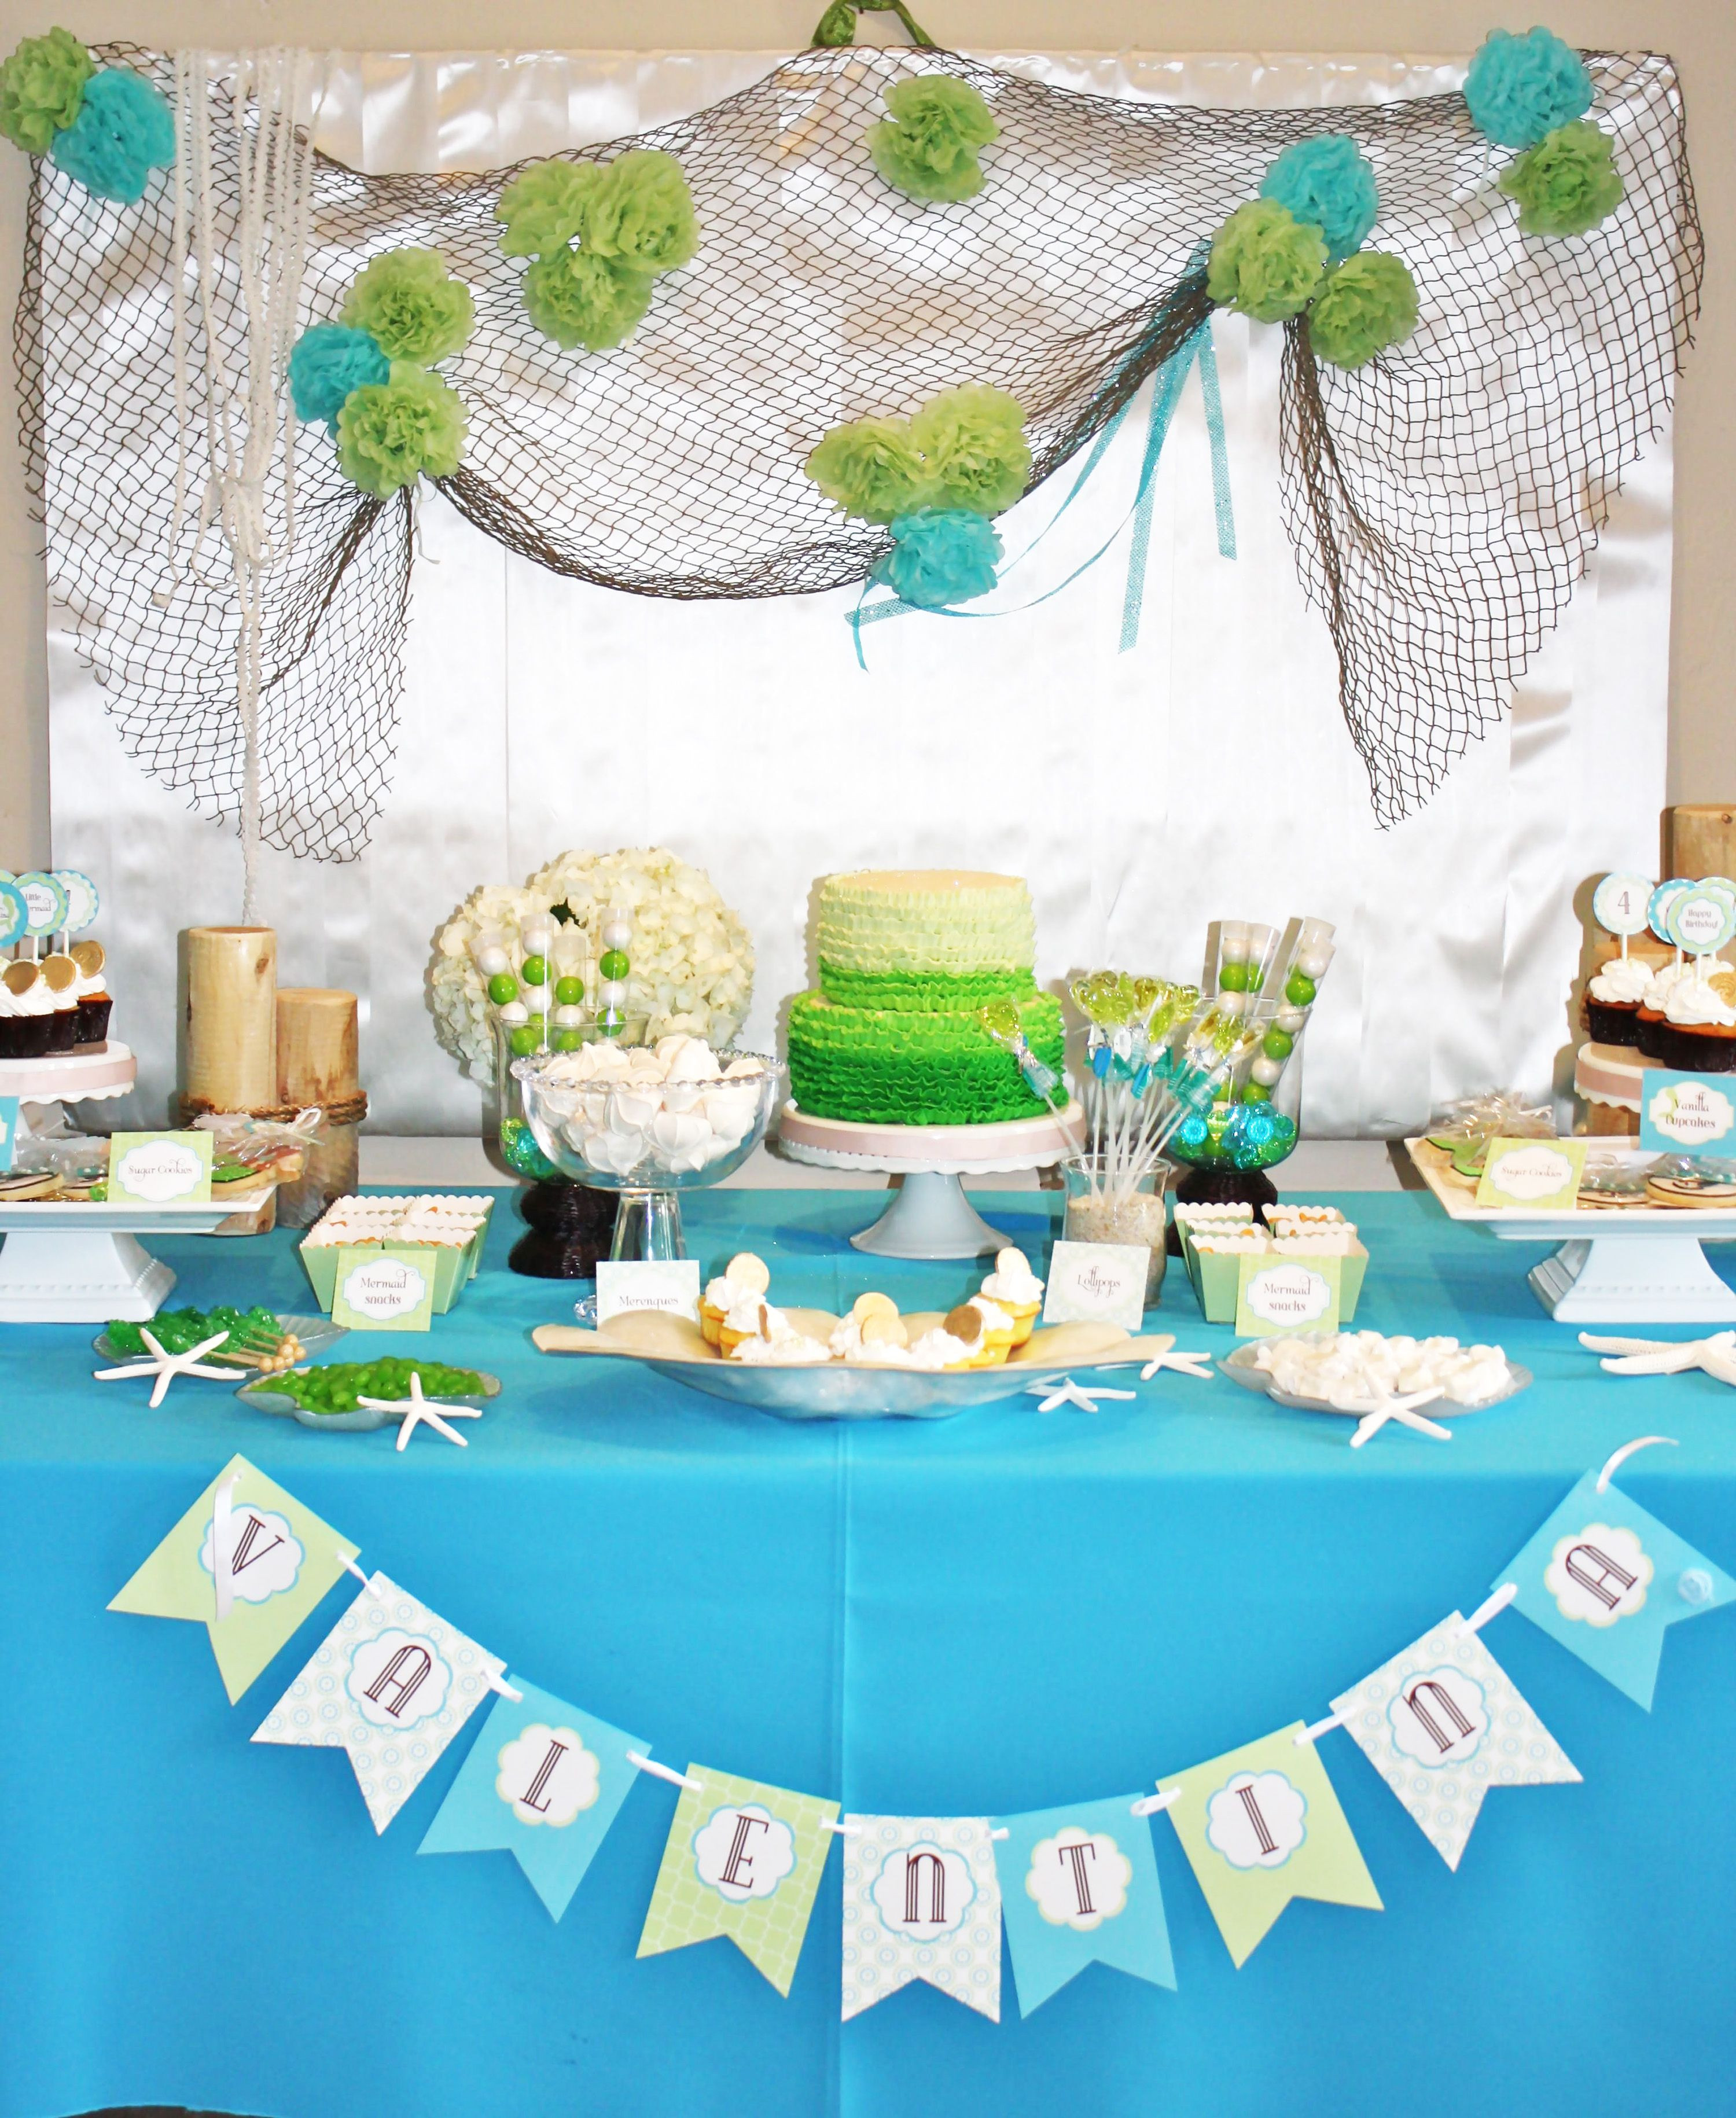 Mermaid Pirate Party Ideas
 mermaid pirate party